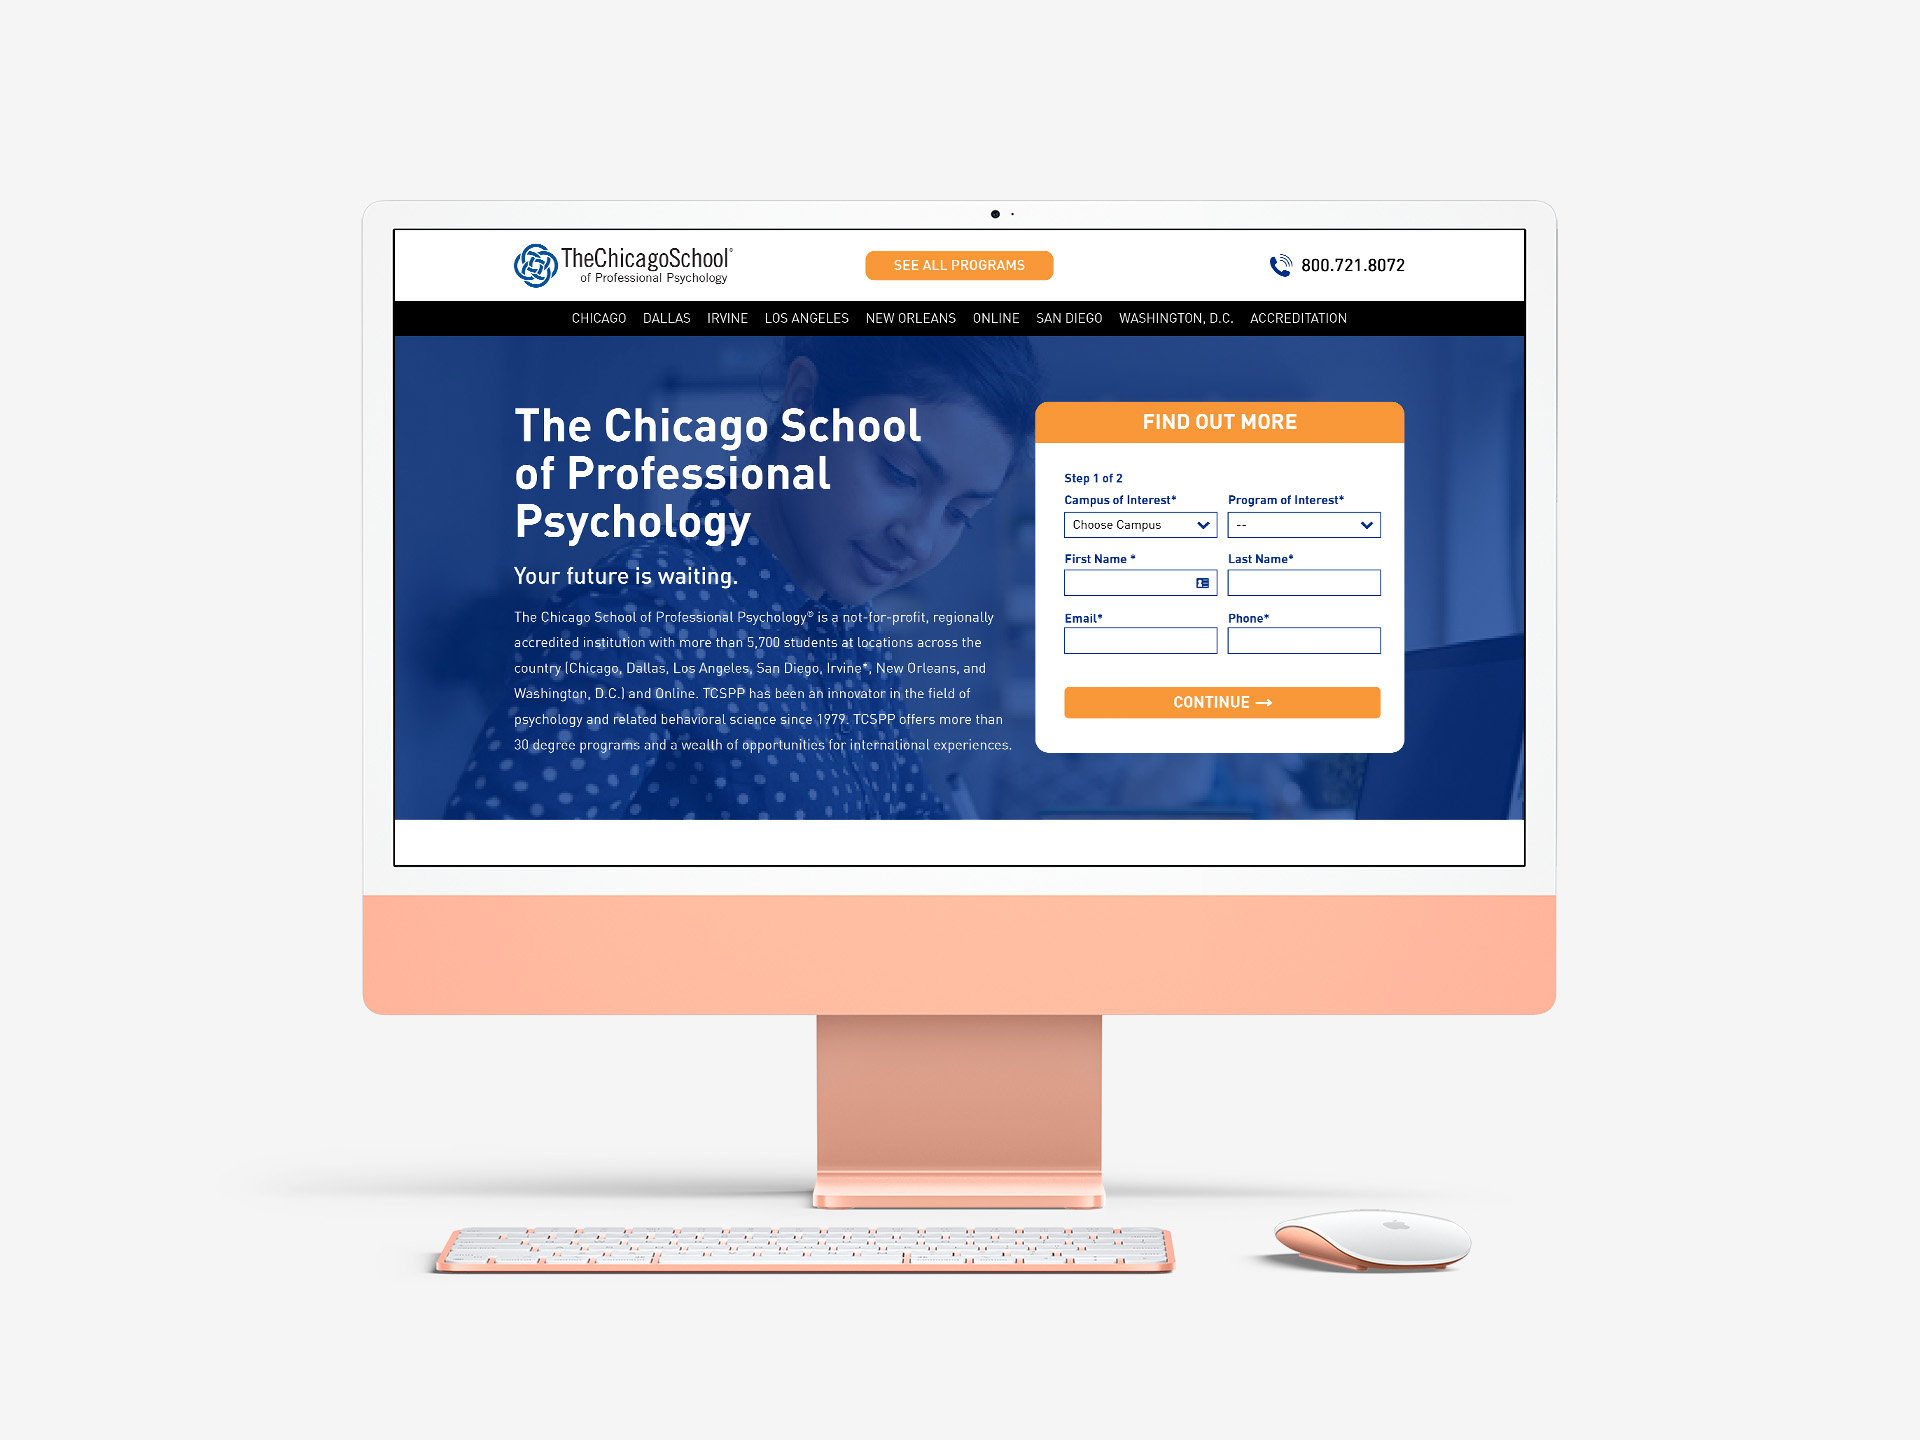 The Chicago School of Professional Psychology Paid Landing Page Design